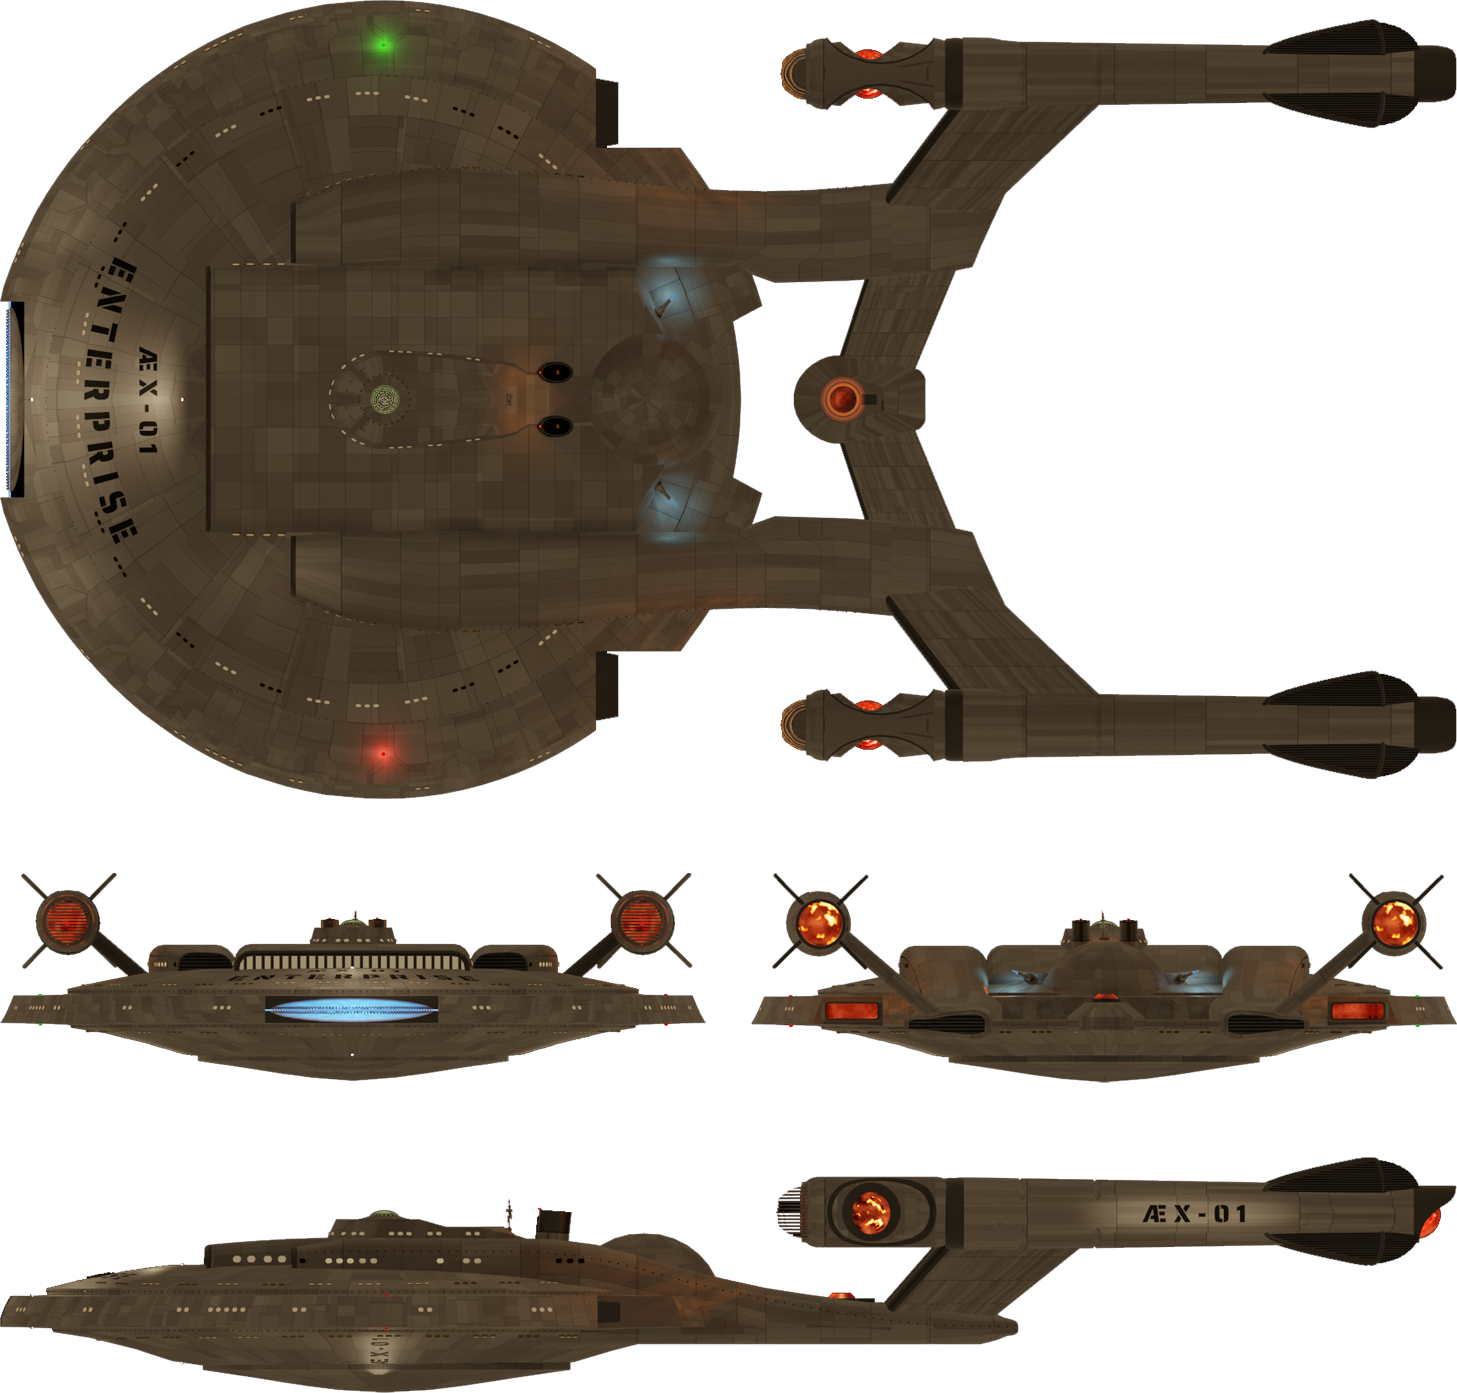 Port, Dorsal, Forward and Aft views of the AEX-01 'Enterprise'